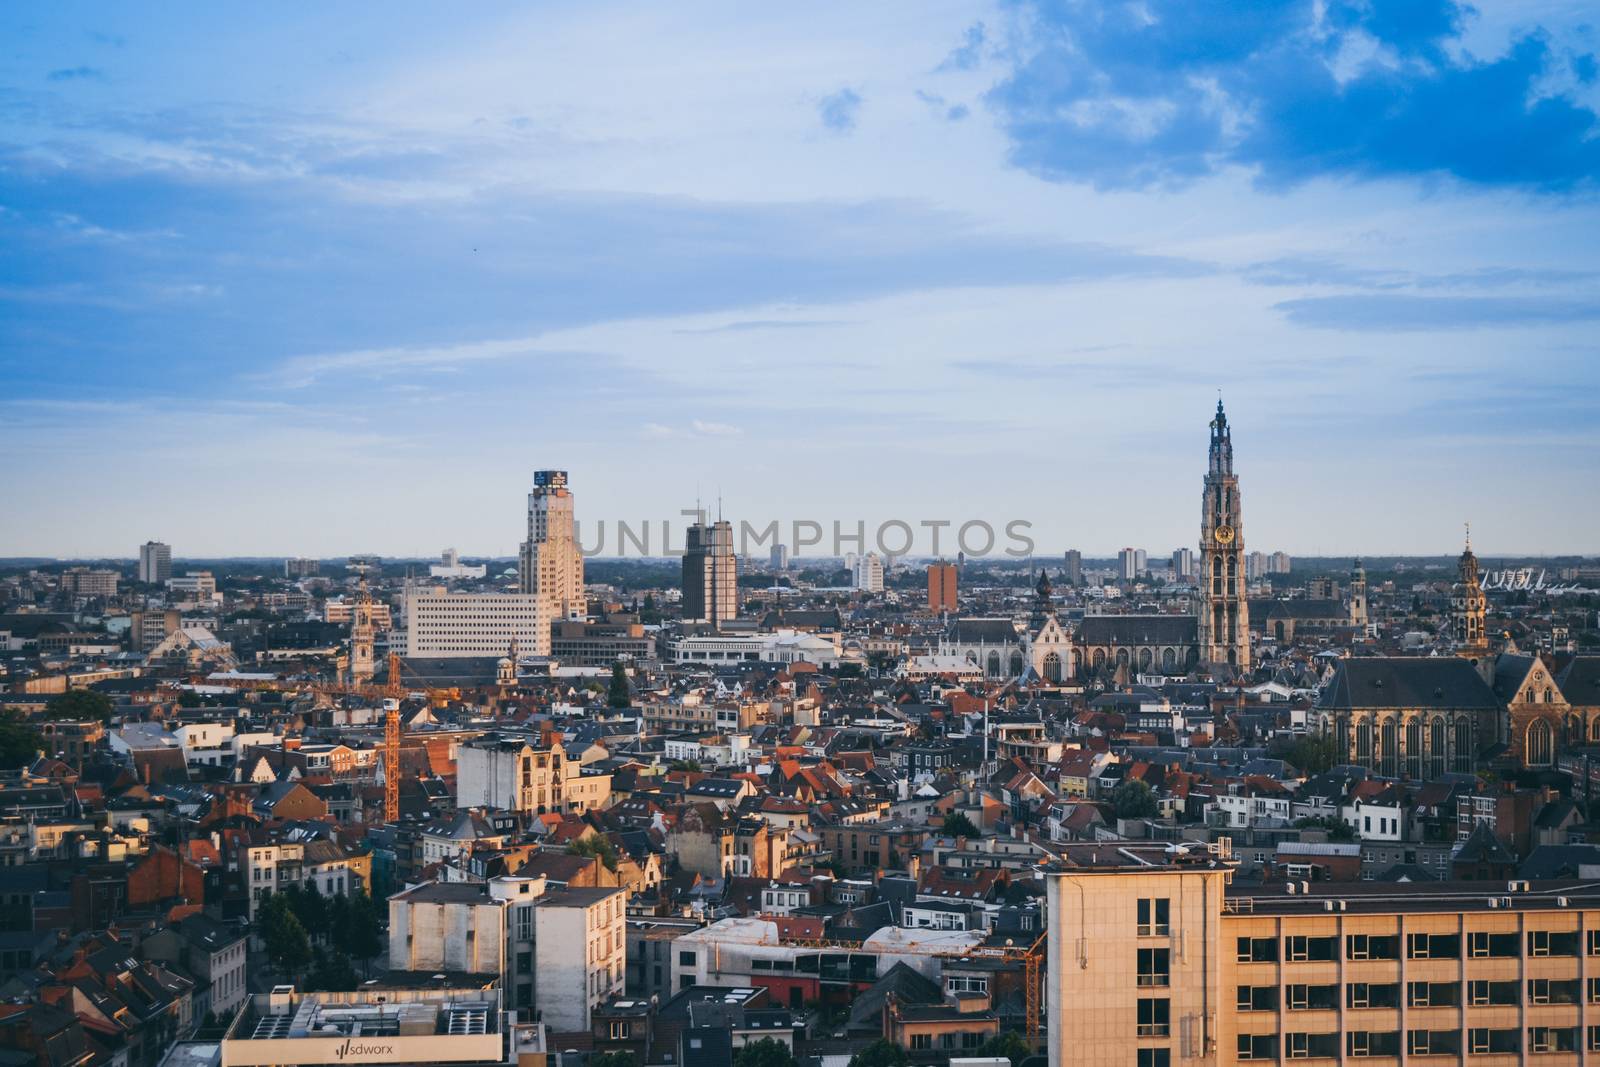 Antwerp, Belgium, June 2011: city skyline and cityscape with cathedral and boerentoren (KBC tower) on a blue sky.